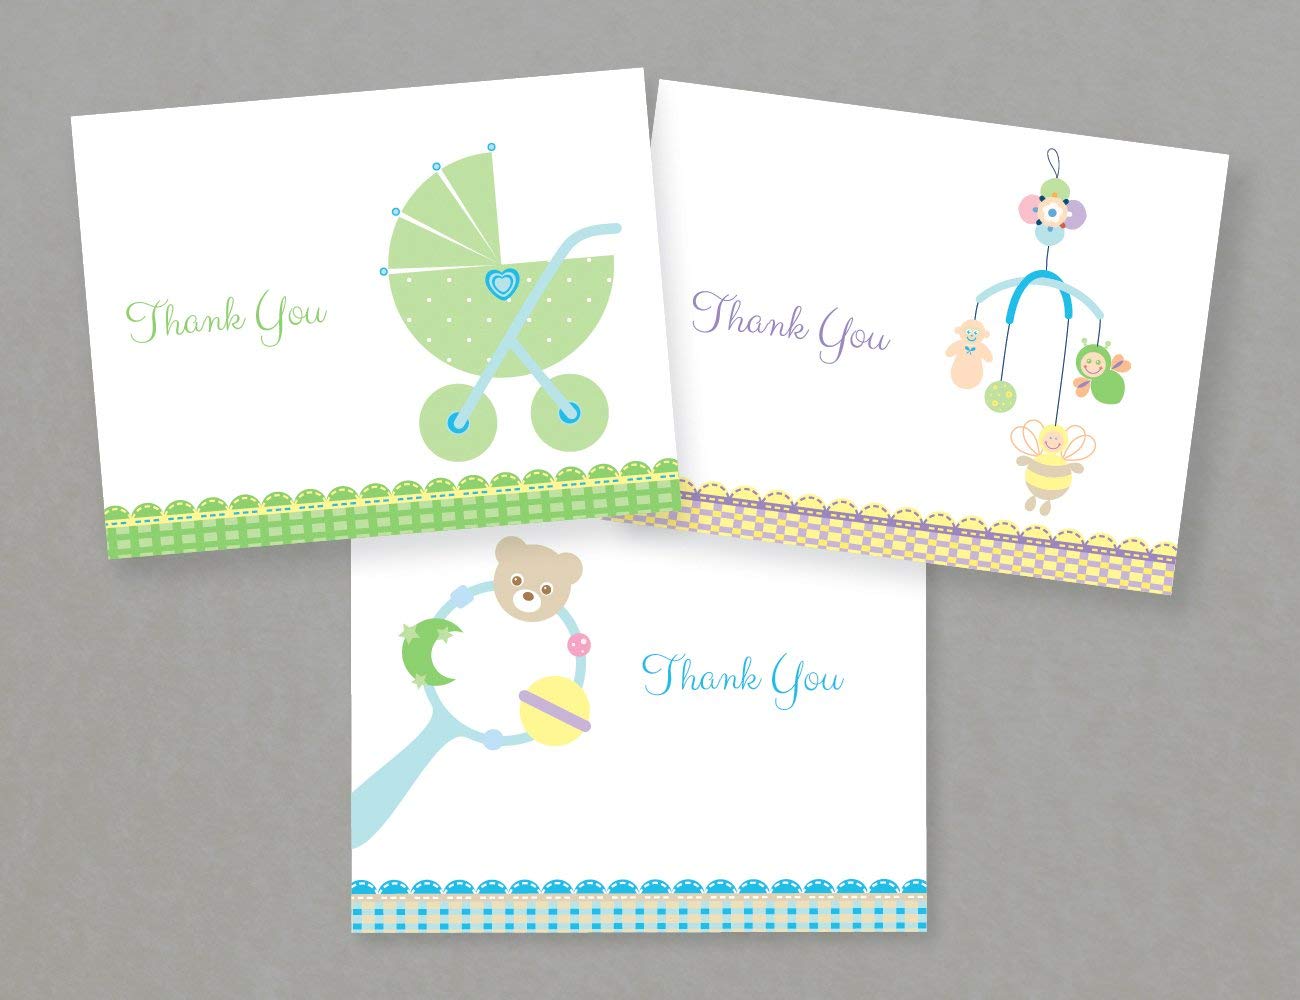 Full Size of Baby Shower:72+ Rousing Baby Shower Thank You Cards Picture Ideas Baby Shower Thank You Cards As Well As Bebe Baby Shower With Baby Shower Zebra Plus Baby Shower Party Ideas Together With Baby Shower Venues London